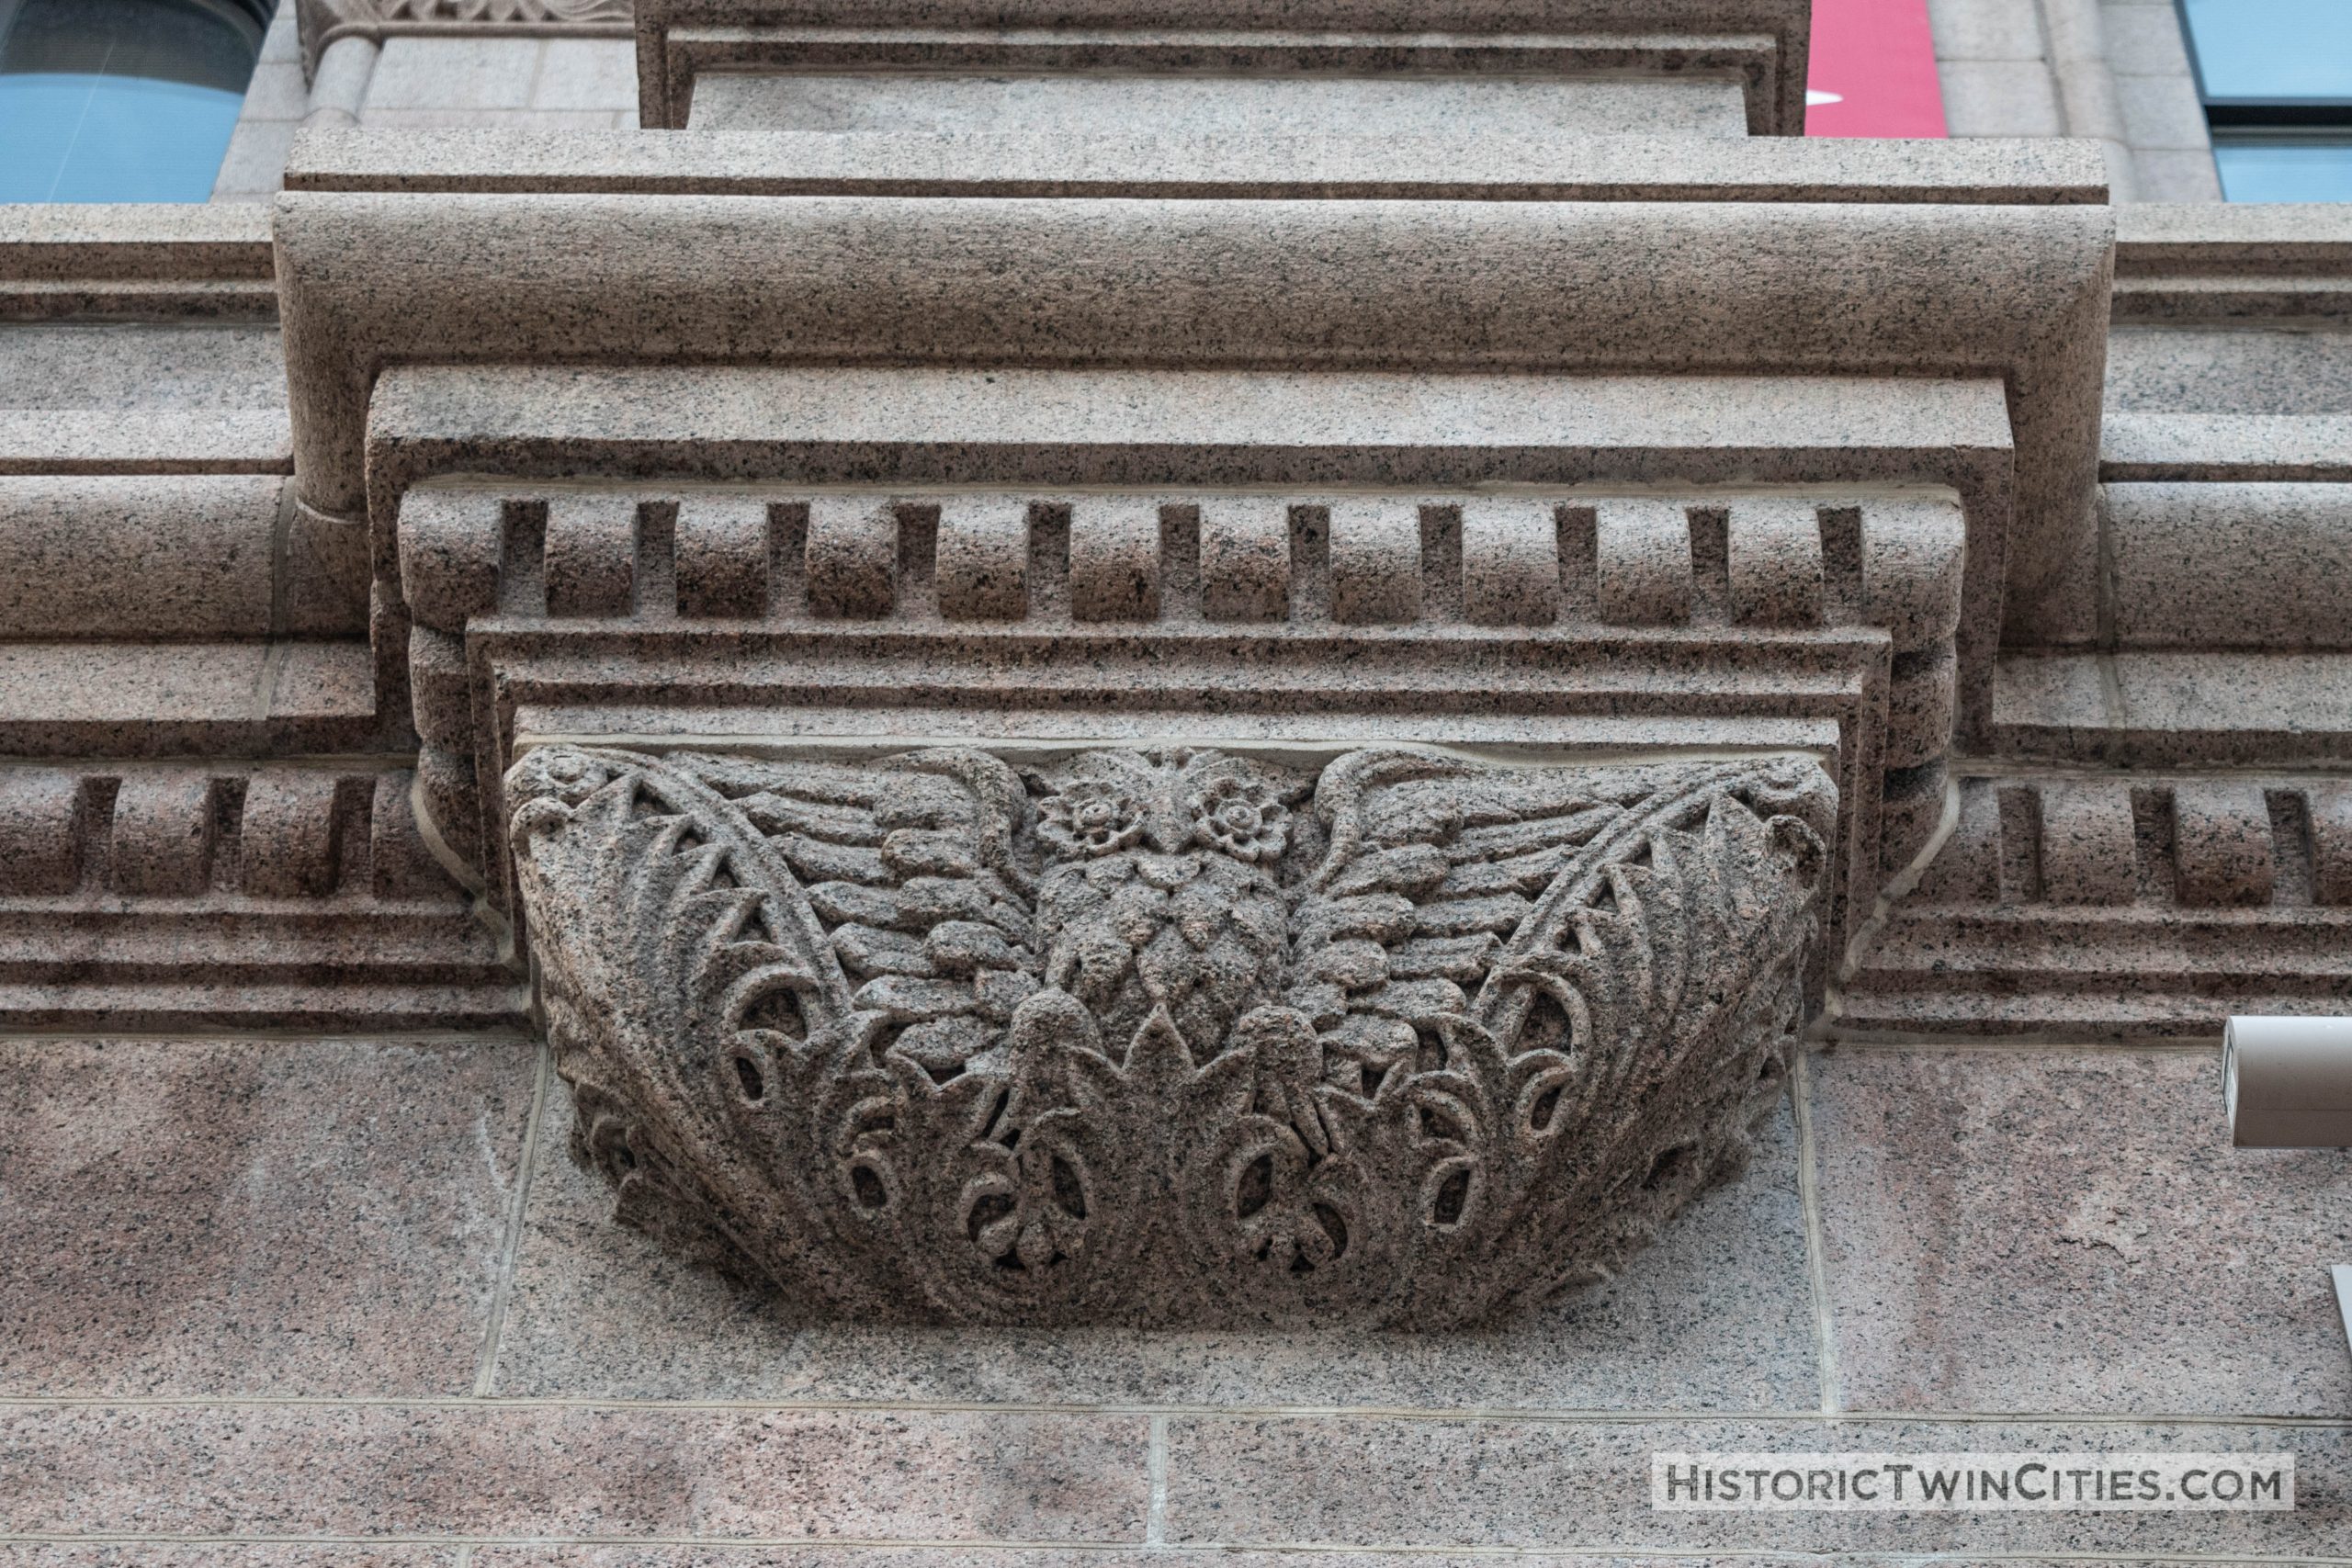 Ornately carved owls in the stonework on the exterior walls of the Landmark Center in St. Paul, MN